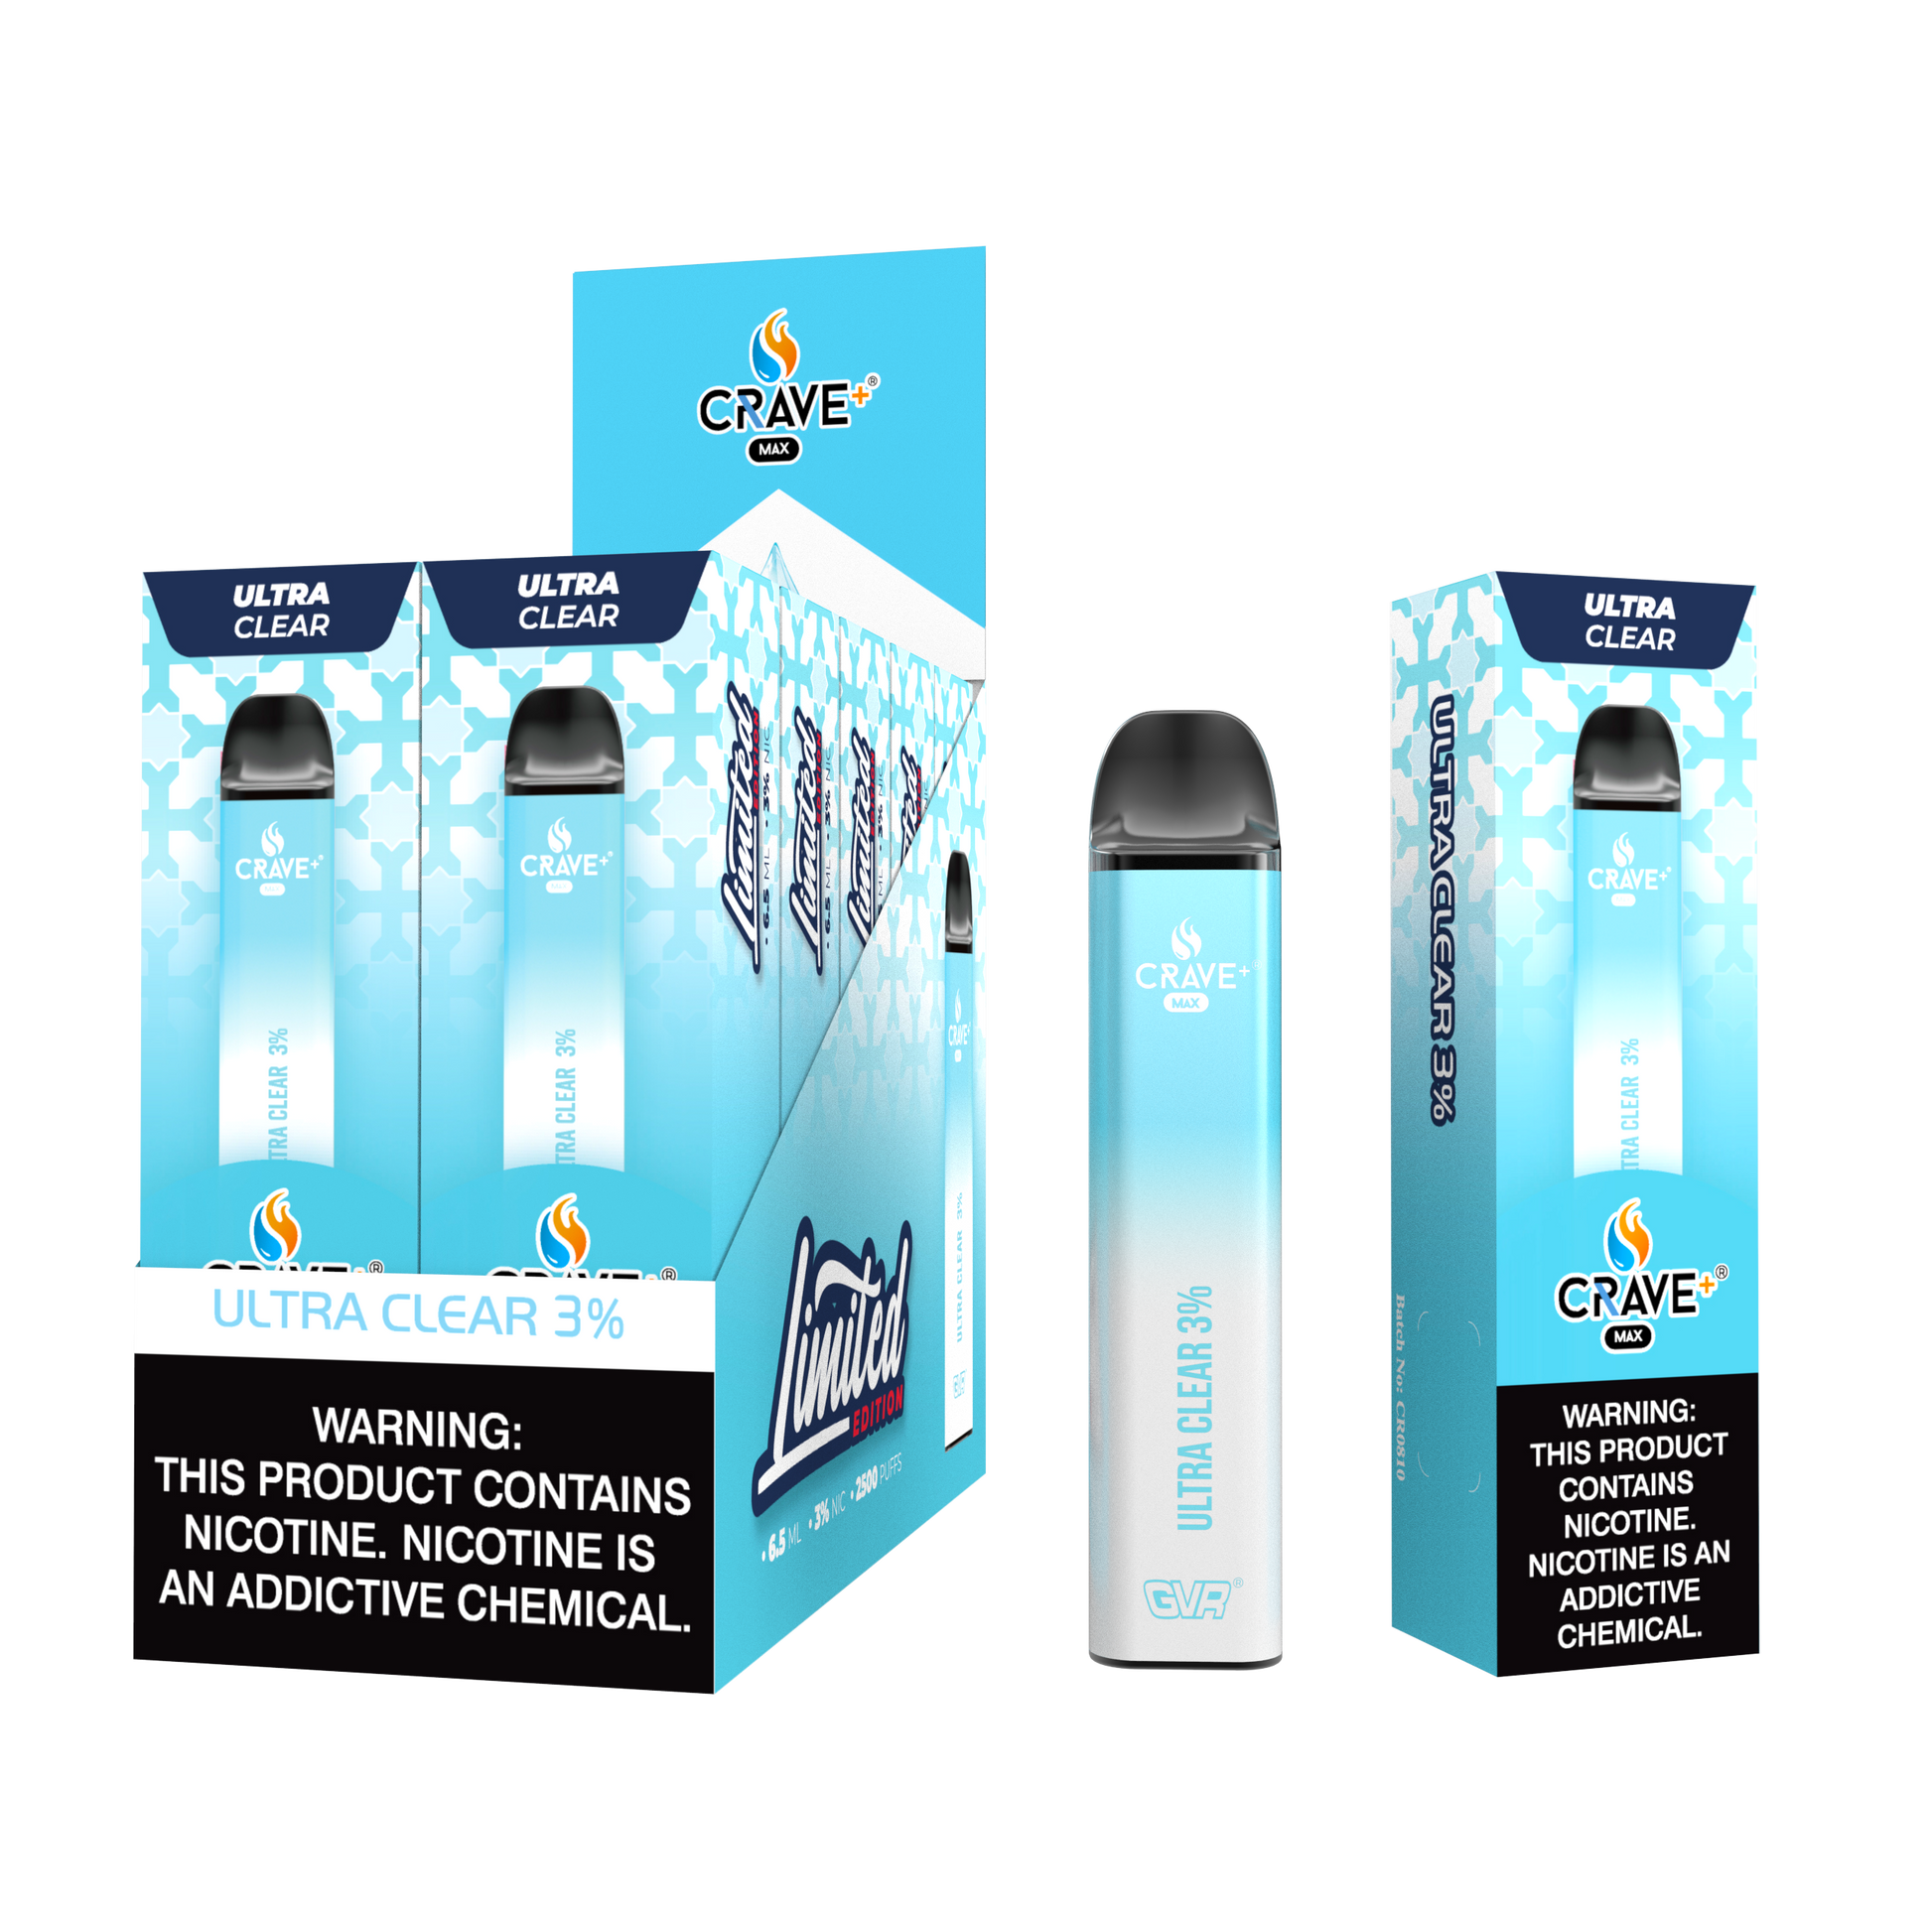 crave max, crave vape, buy crave max, crave max for sale, crave max flavors, crave flavors vape, buy crave vape online, crave max gvr, crave 2500 puffs, crave clear, crave max clear, crave clear 3%, crave clear 5%, crave max 3%, crave max 5%, crave 3%, crave 5%, crave vape clear, vape clear flavor, crave flavor clear, crave max kik, crave max limited edition, crave new clear, crave max new clear, crave max kik, crave max kalibloom clear, crave max ultra clear, crave ultra clear